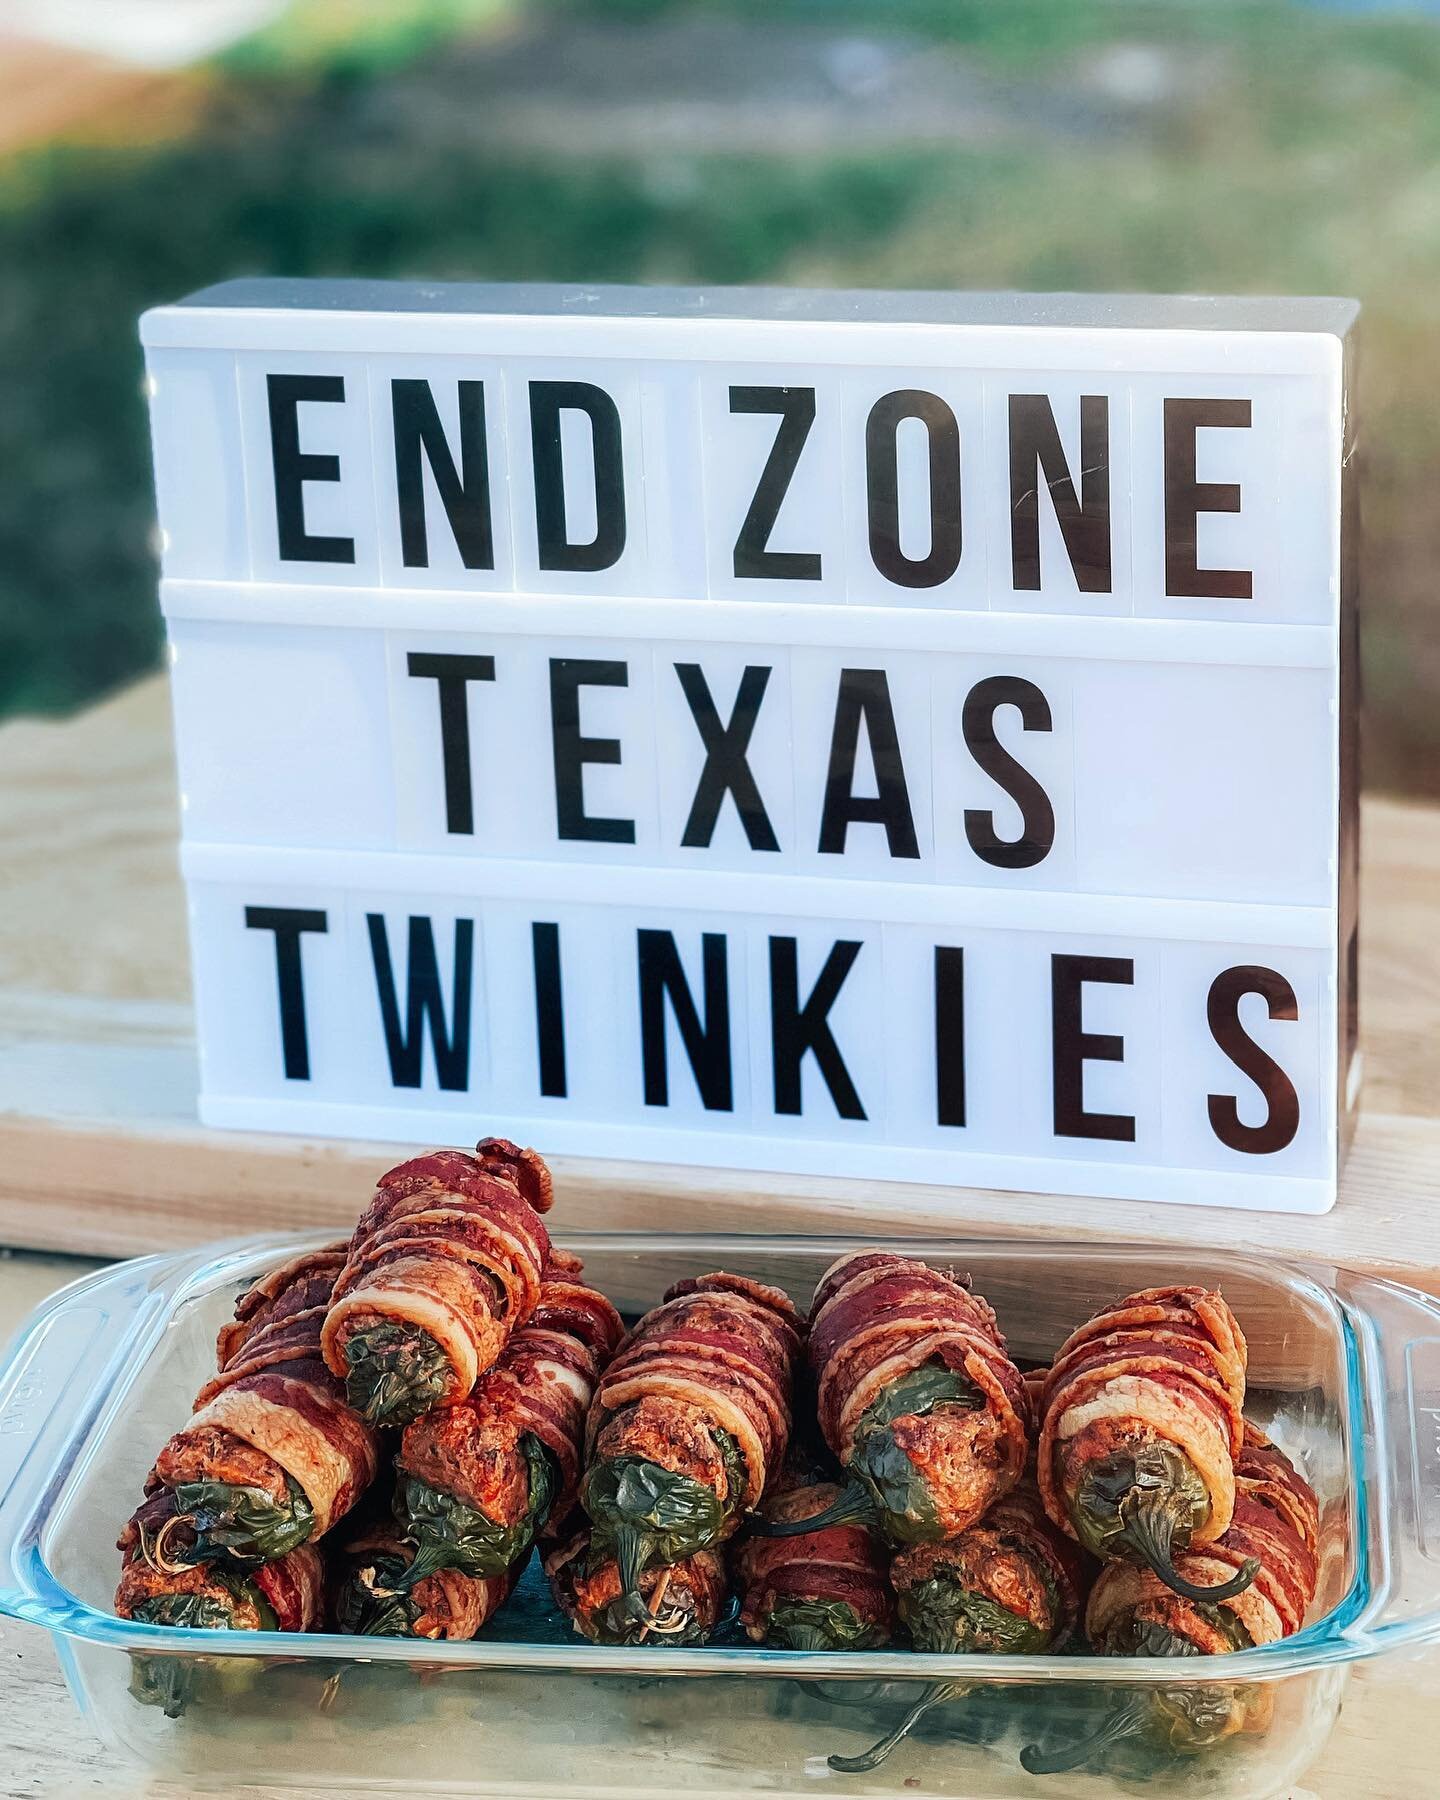 It&rsquo;s almost time for the big game! Don&rsquo;t forget to stop in and stock up on your football favorites!!! 🏈
We&rsquo;re open 8-3 today! You can also call ahead to reserve at 903.432.9000 

#bestofeasttexas #texasbbq #bbqlife #texastwinkies #